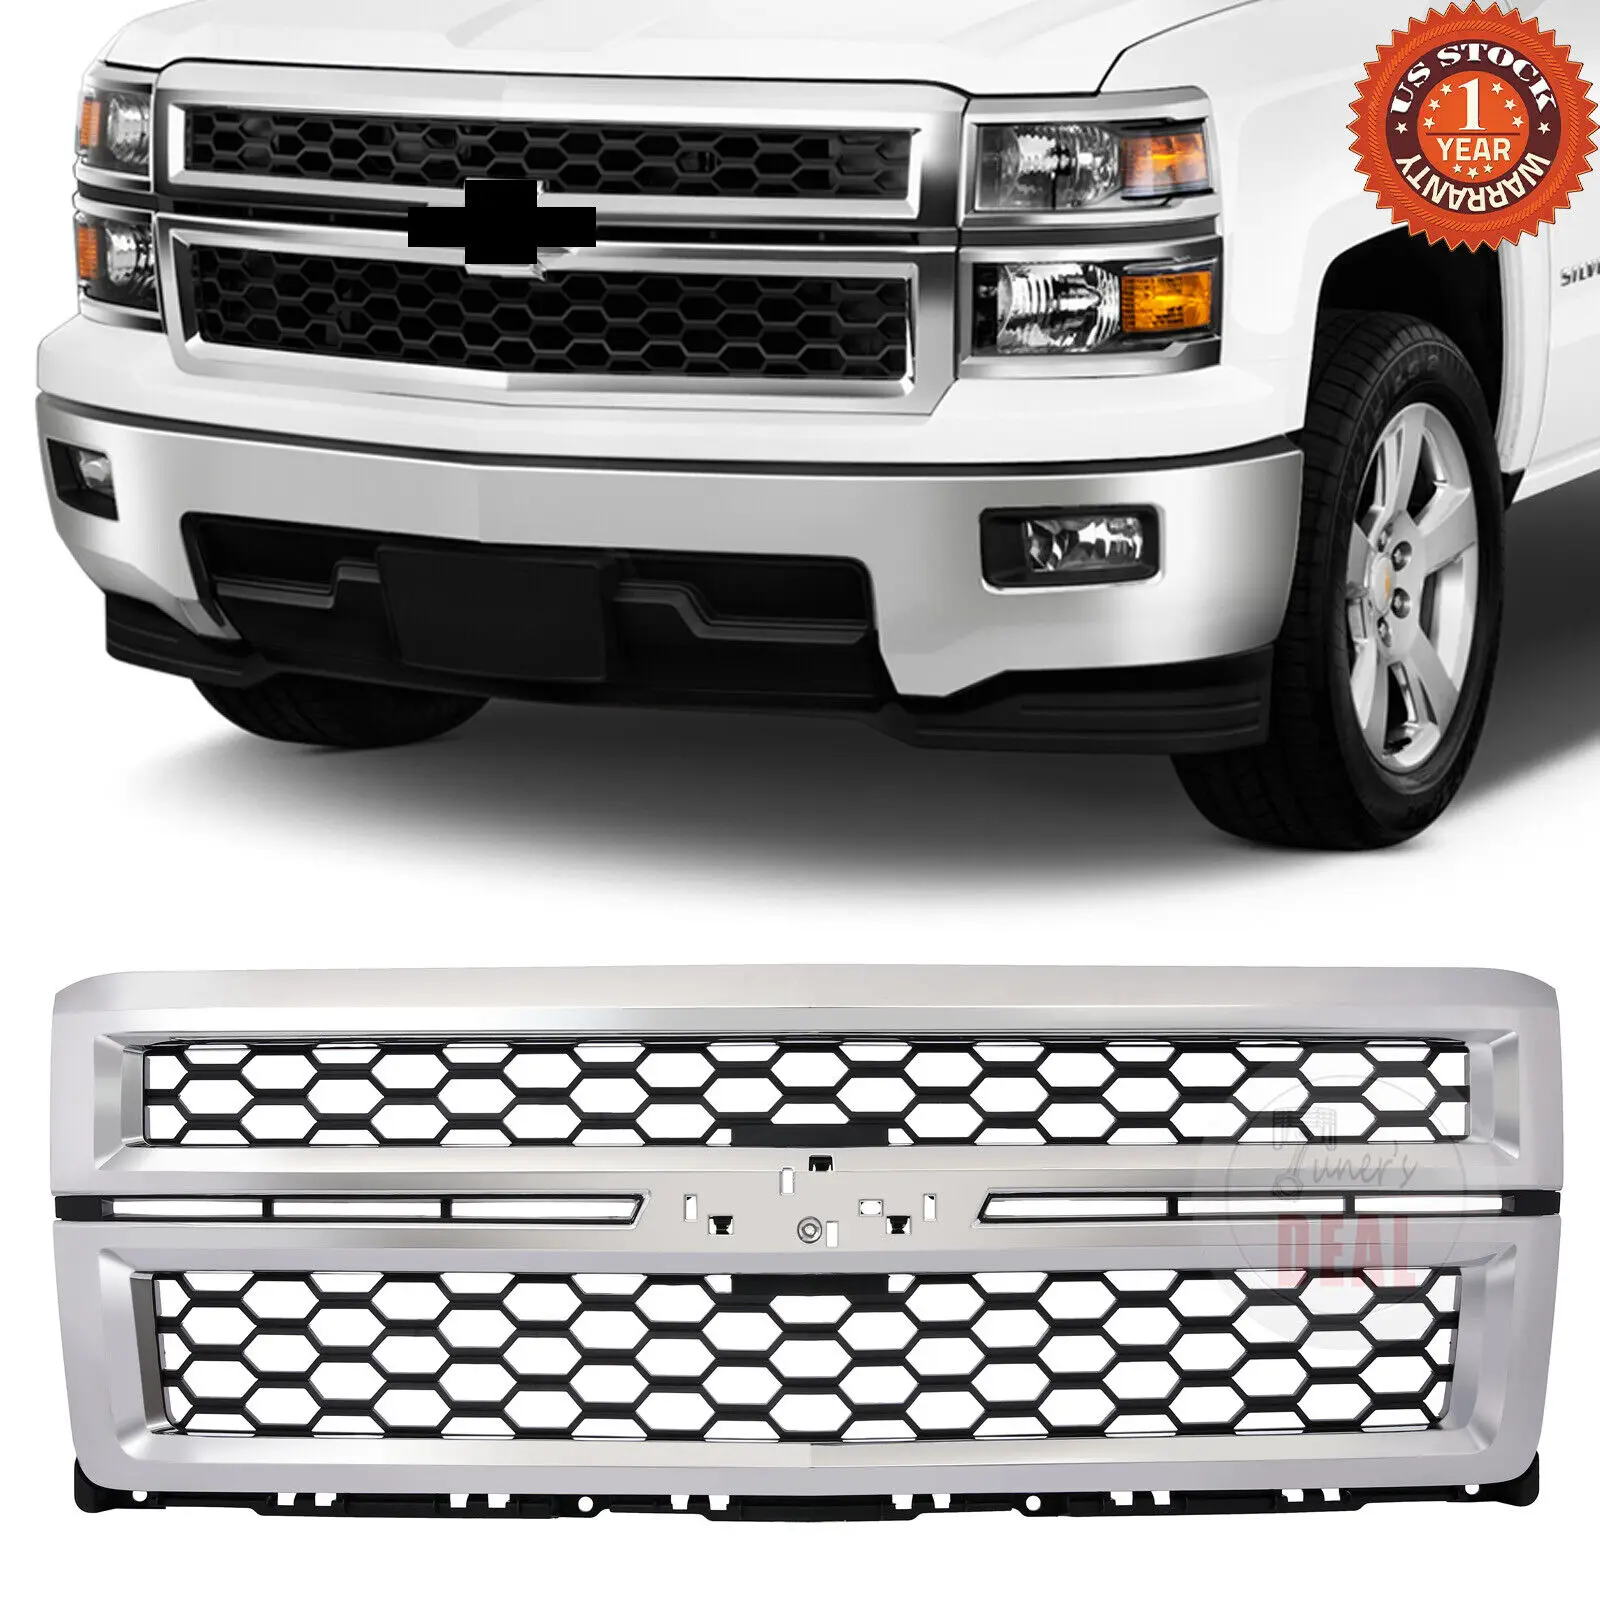 

Front Bumper Honeycomb Grille ABS Plastic For 2014 2015 CHEVROLET SILVERADO 1500 104-02508B